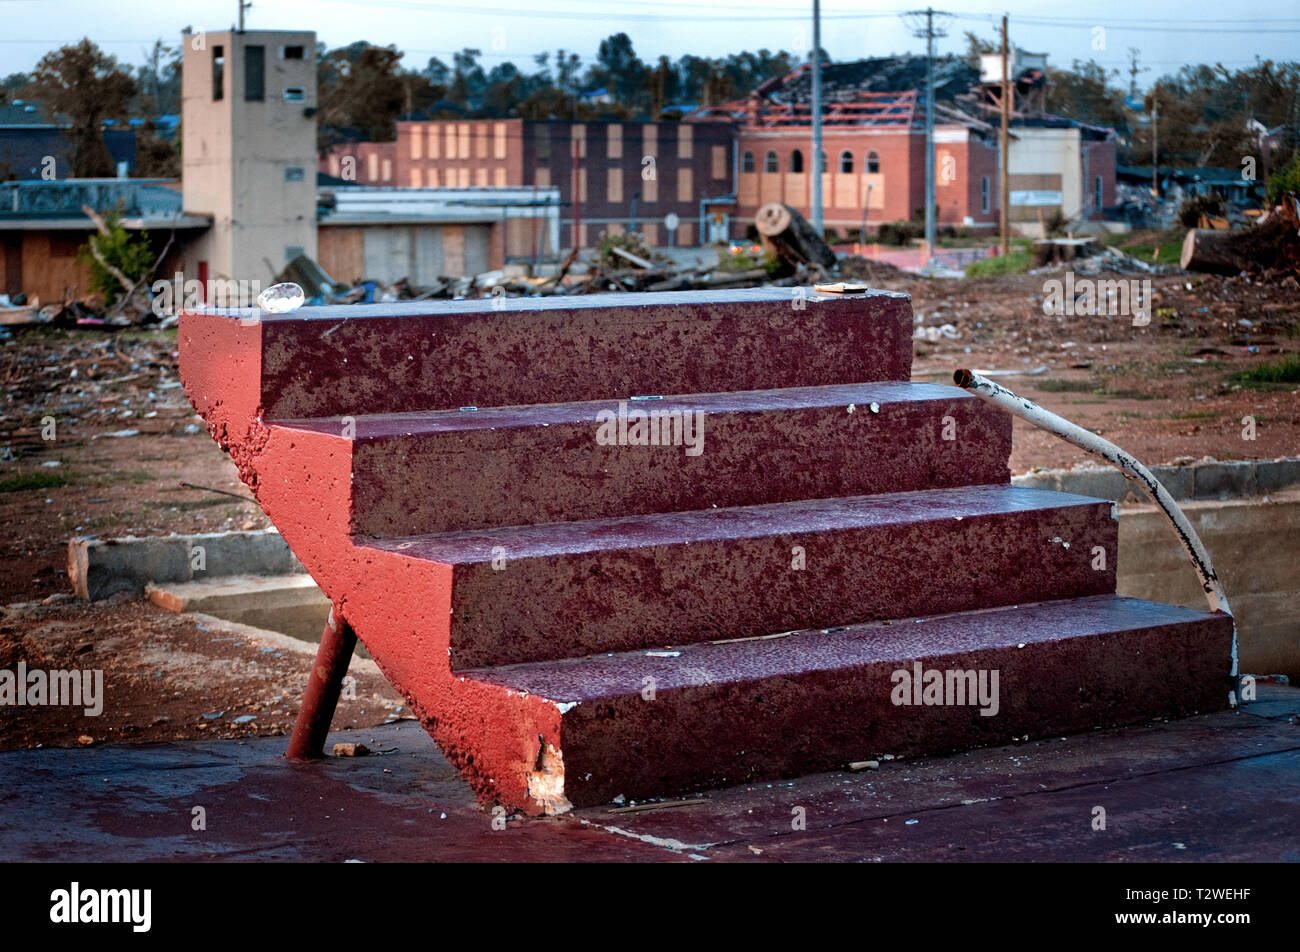 Porch steps are all that remains of a home after the April 27 tornado, July 26, 2011, in Tuscaloosa, Alabama. Stock Photo